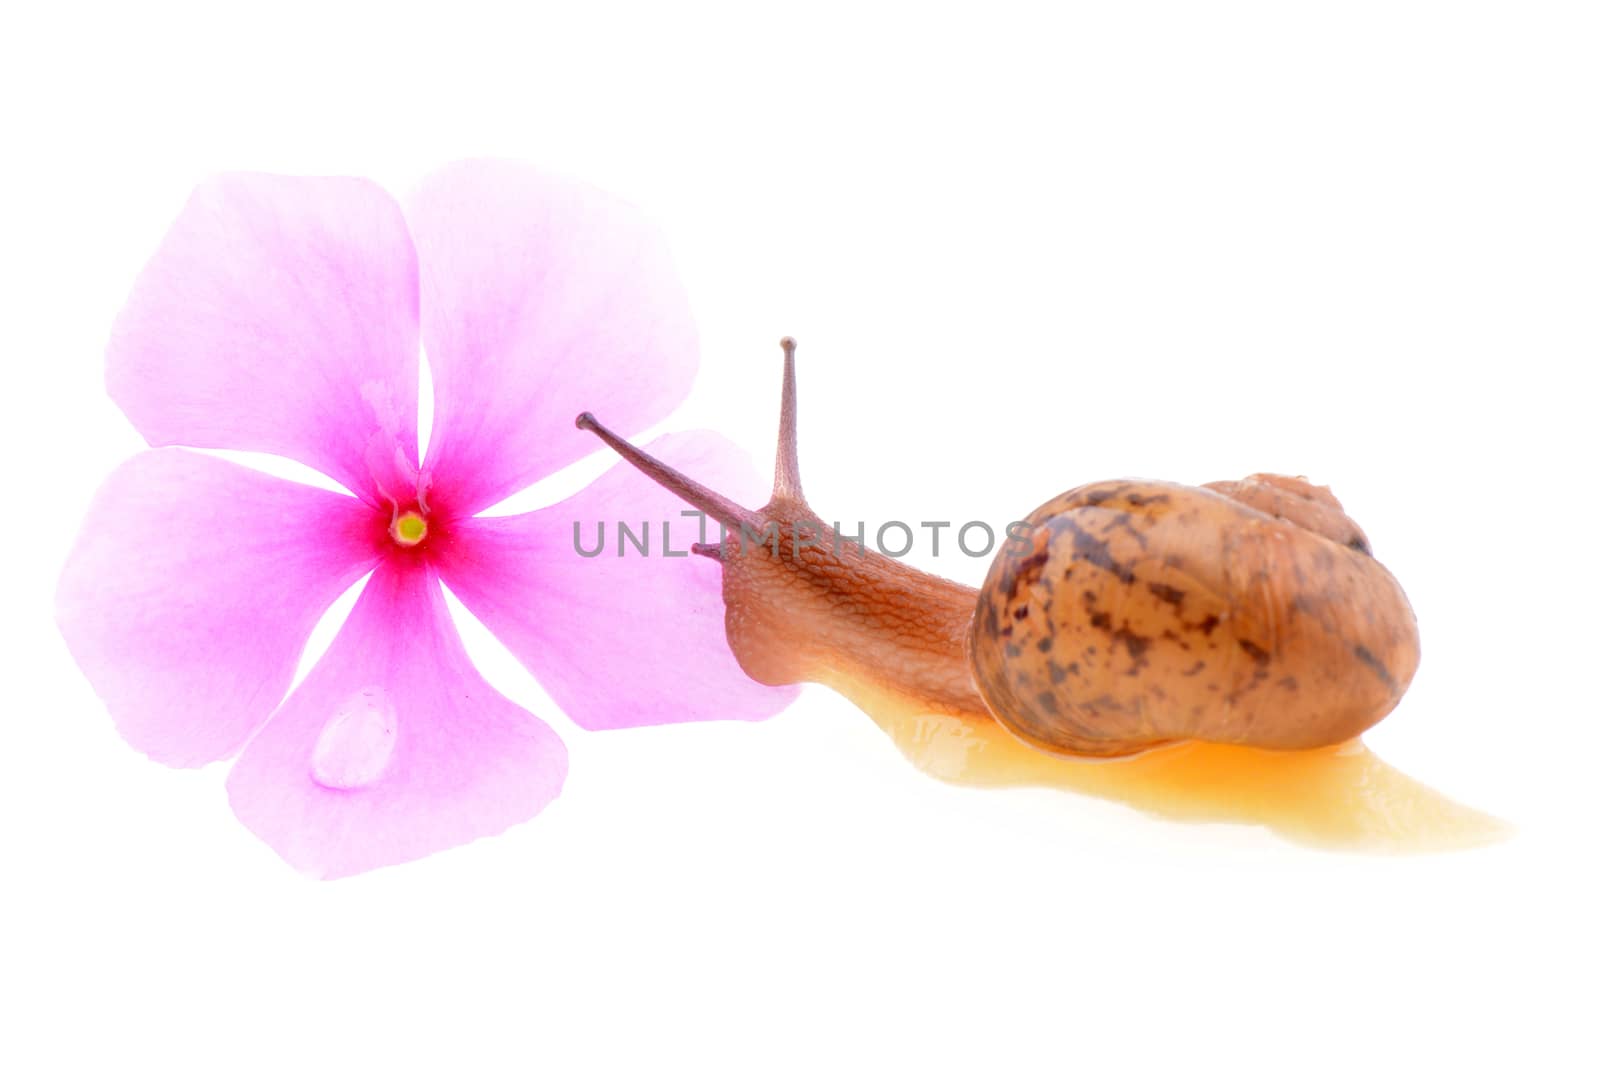 Snail on a white background by bbbar